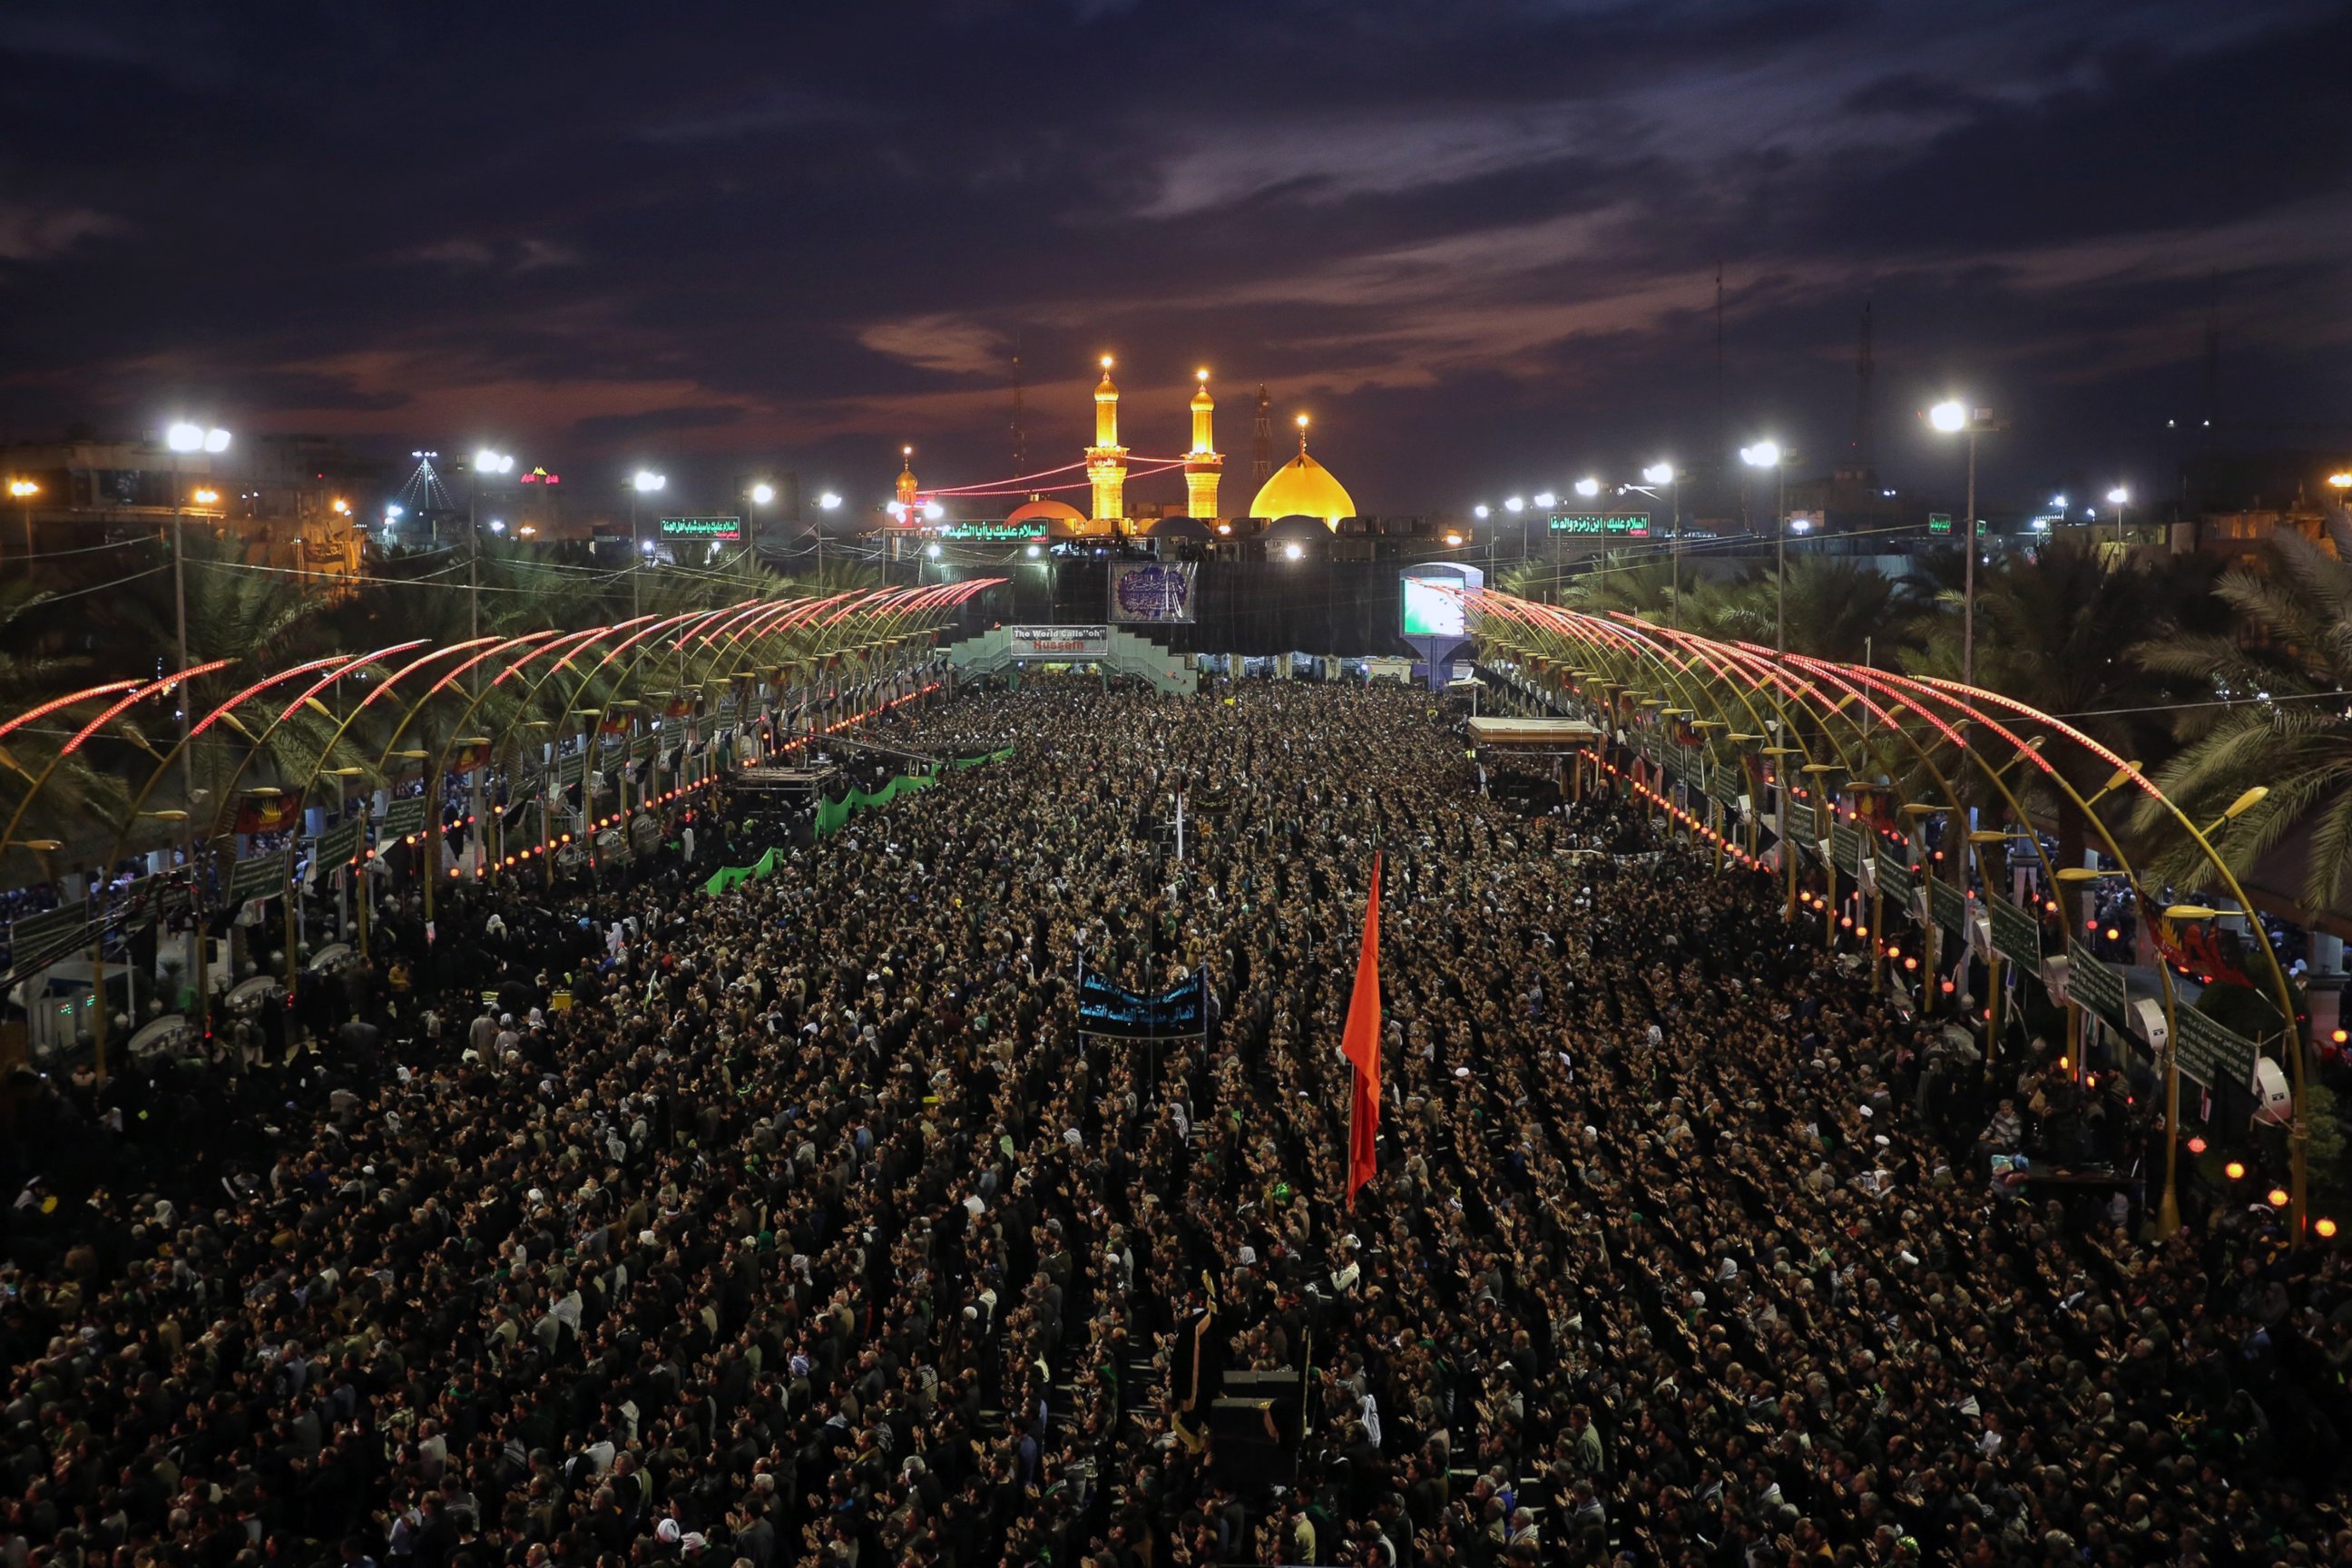 PHOTO: Shi'ite people gather during the Arba'een ceremony in the holy city of Karbala, southern Iraq, Dec. 12, 2014.